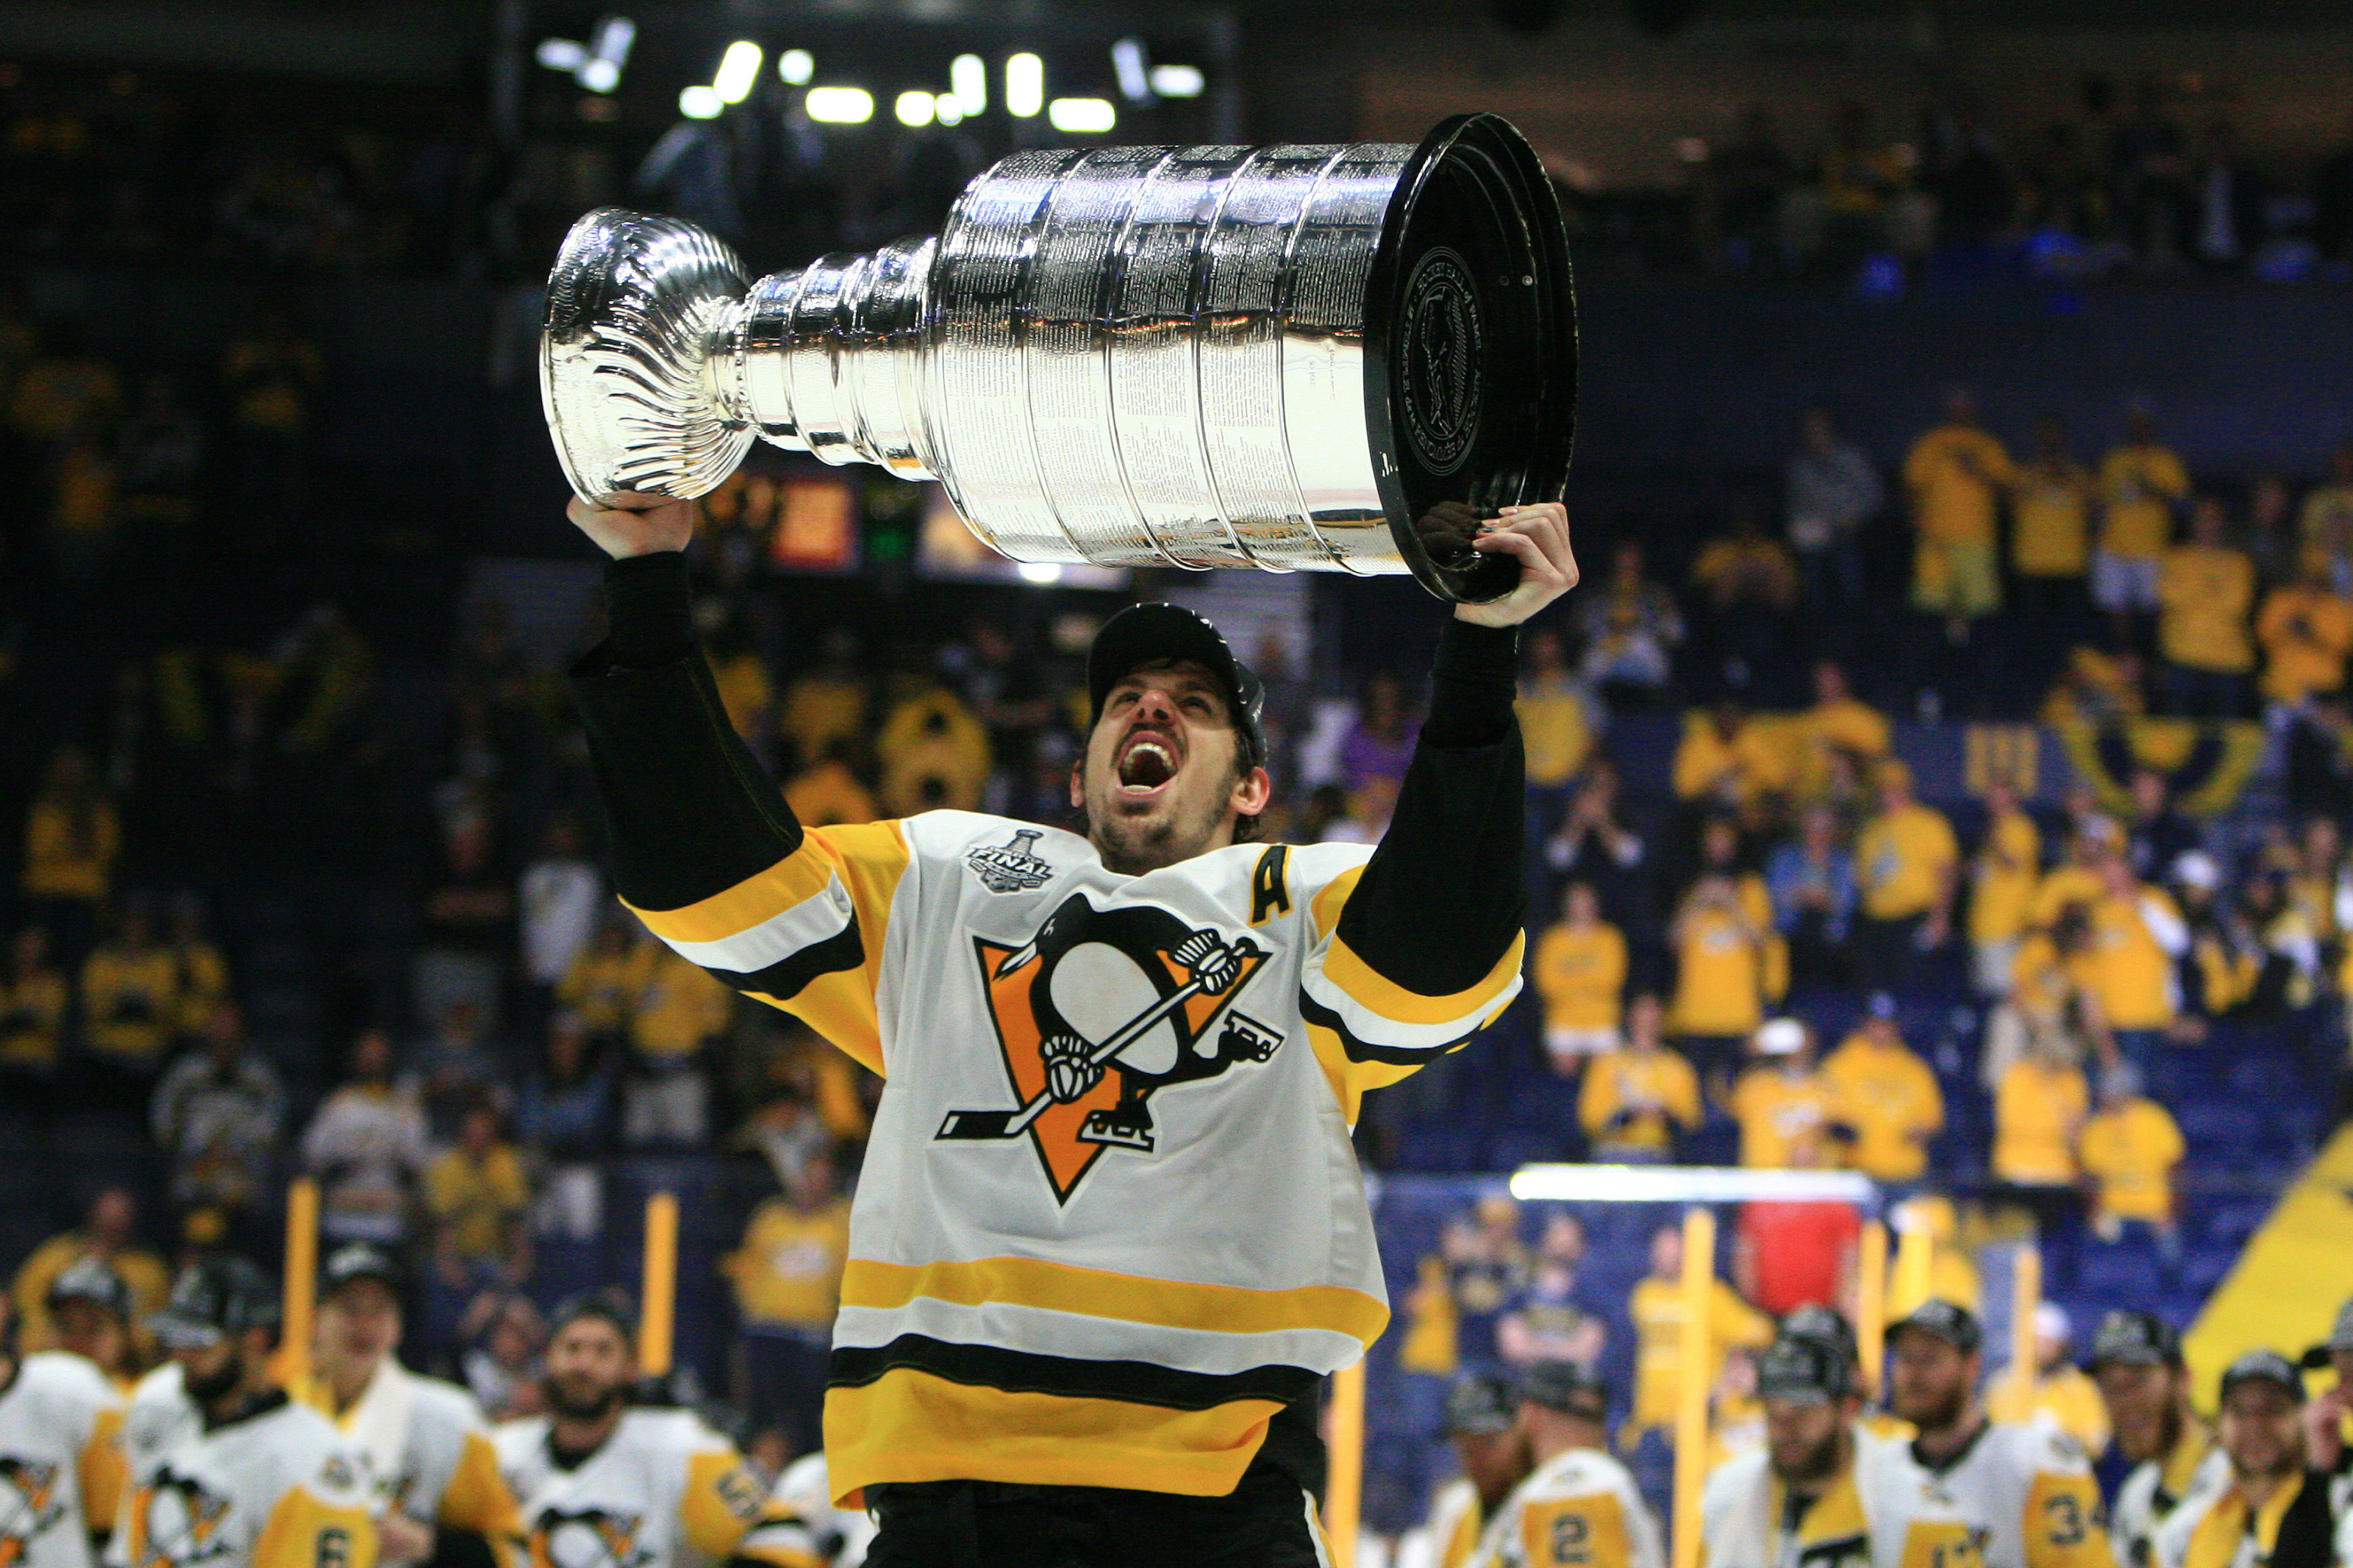 I always think about Cups' - Rejuvenated Malkin leads Pens